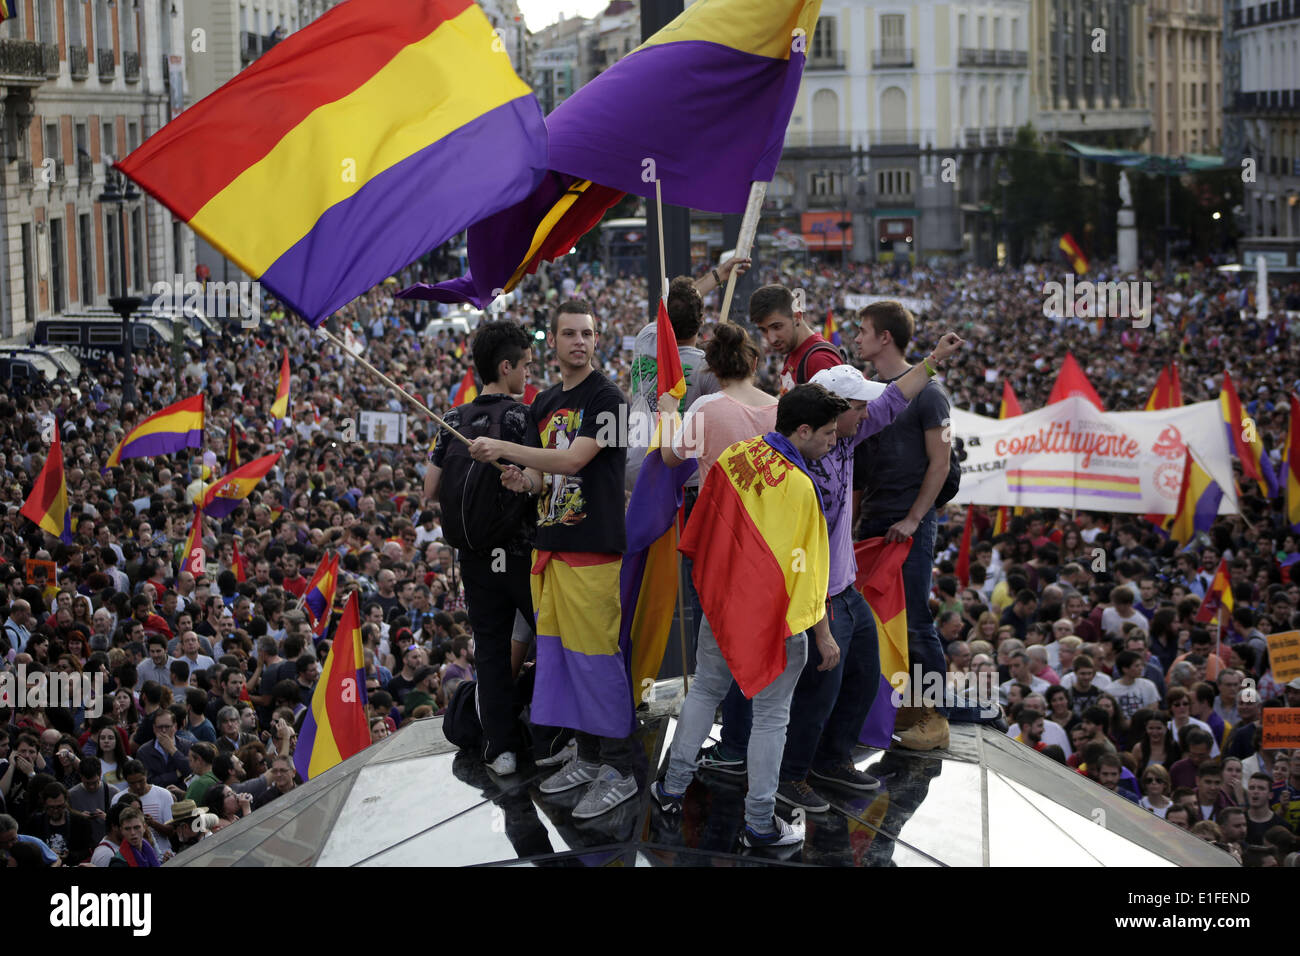 Madrid, Spain. 2nd June, 2014. Protestors wave republican flags and shout slogans as crowds of people gather in the main square of Madrid, Spain, Monday, June 2, 2014 after the announcement of the abdication of Spain's King Juan Carlos. King Juan Carlos plans to abdicate and pave the way for his son, Crown Prince Felipe, to become the country's next king. The 76-year-old Juan Carlos oversaw his country's transition from dictatorship to democracy but has had repeated health problems in recent years. Credit:  ZUMA Press, Inc./Alamy Live News Stock Photo